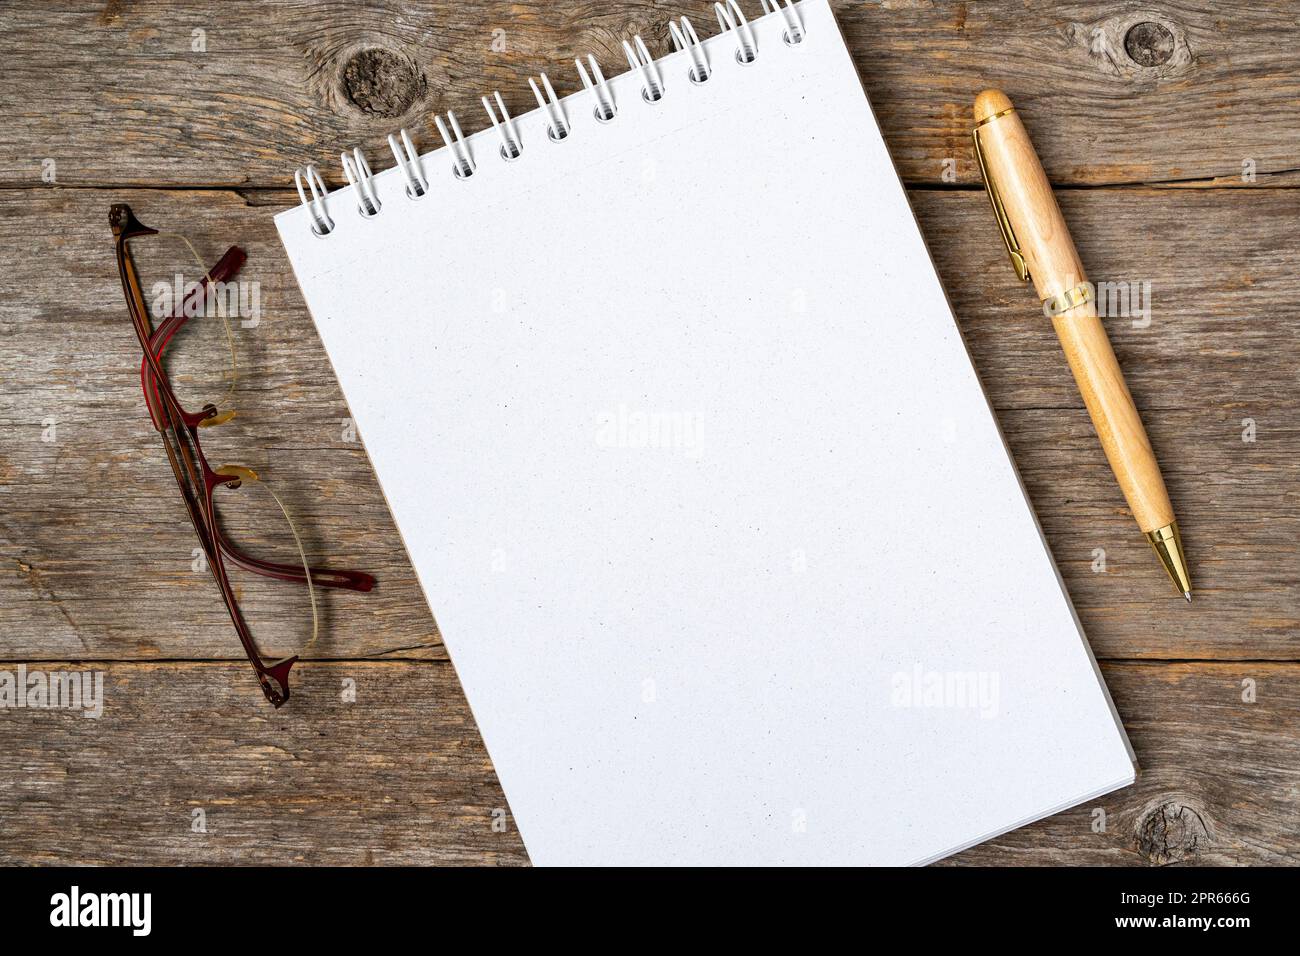 Blank spiral notebook, pen and glasses on a wooden table Stock Photo